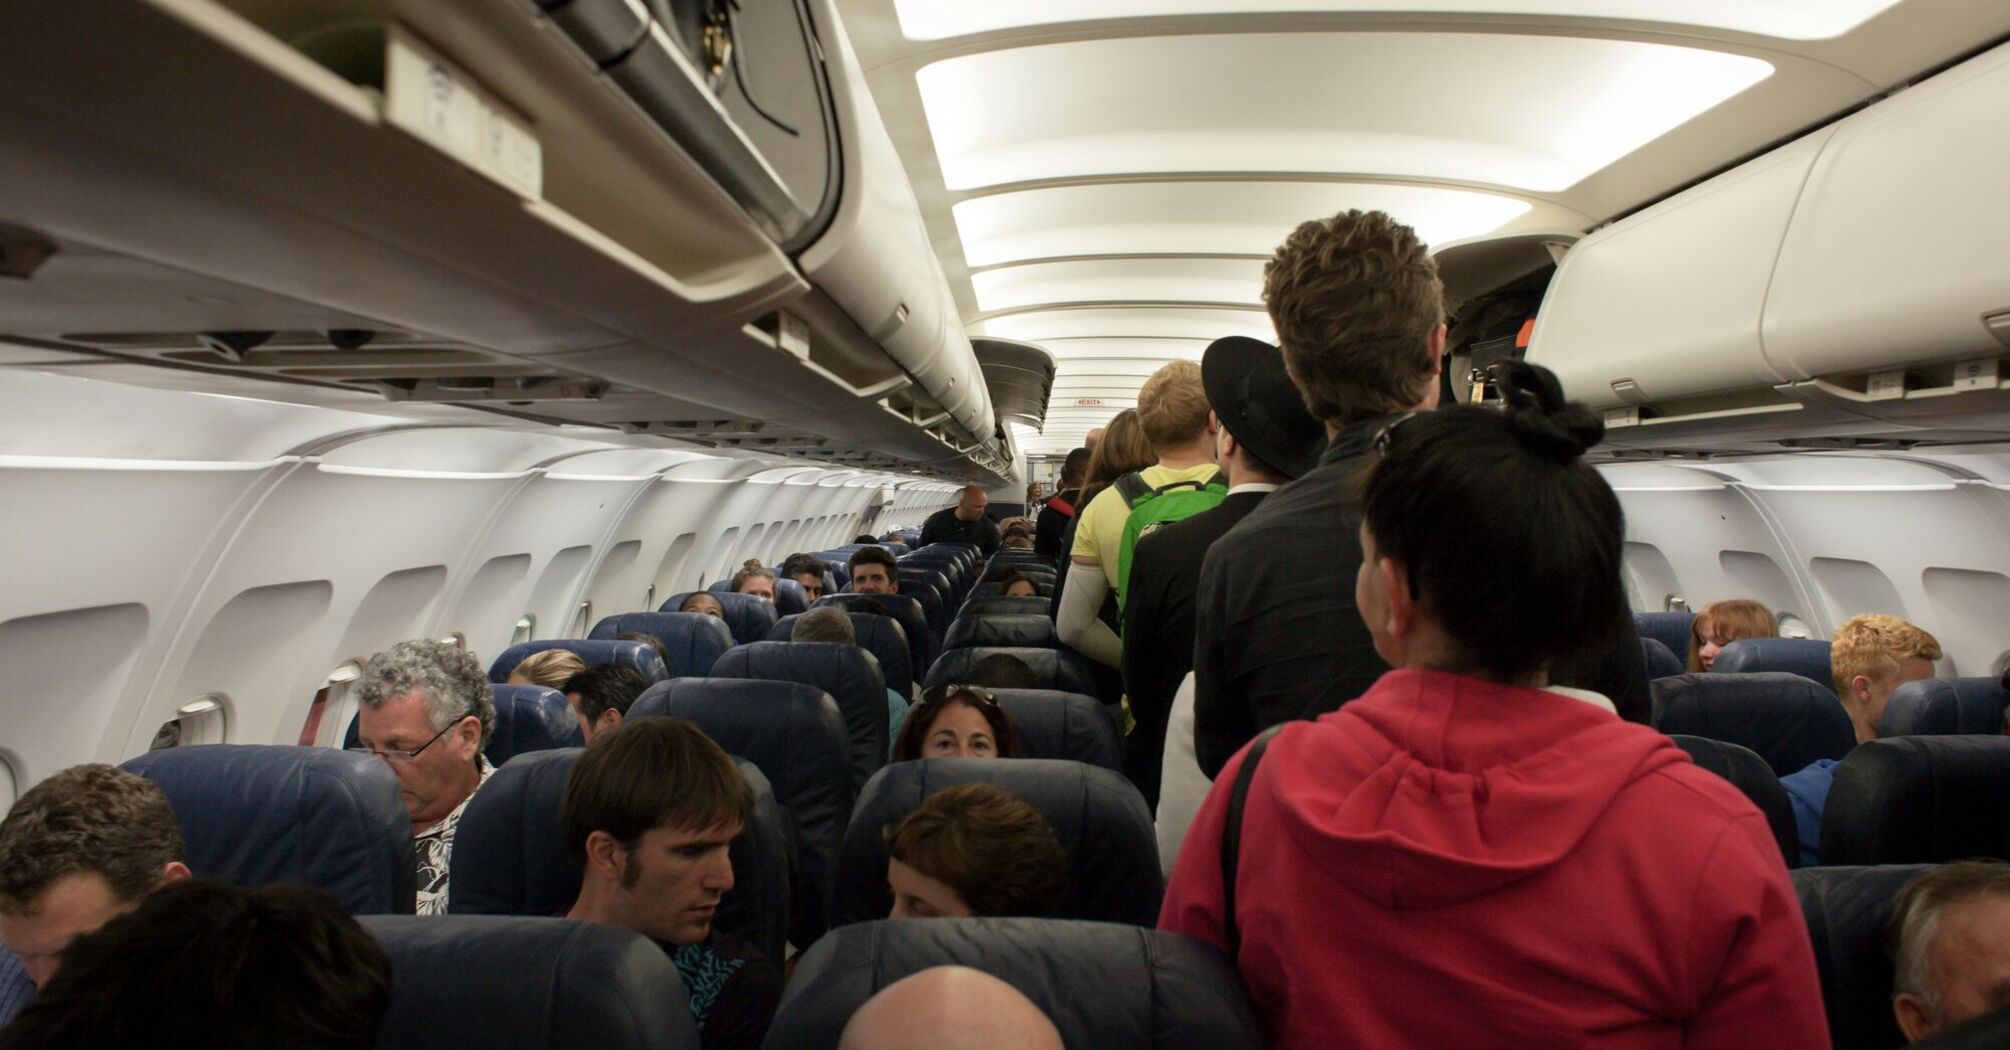 How to be the first to exit the plane after landing without making others nervous or causing a crowd: 2 tips from an expert